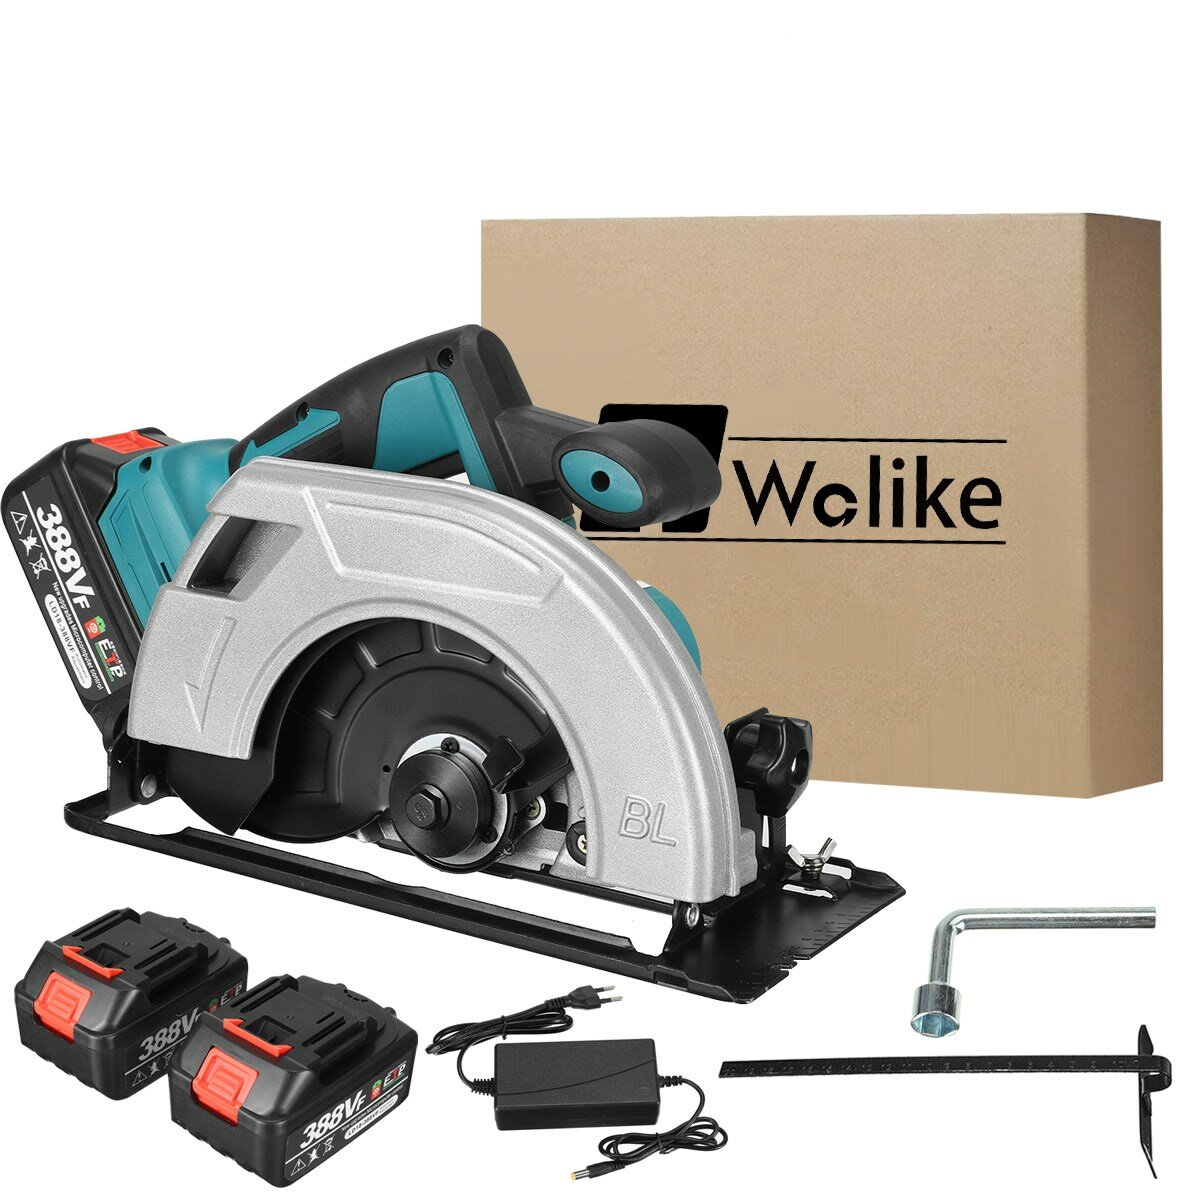 1200W Cordless Brushless Motor 185mm Circular Saw Handsaw with 1/2 18V Li-ion Battery